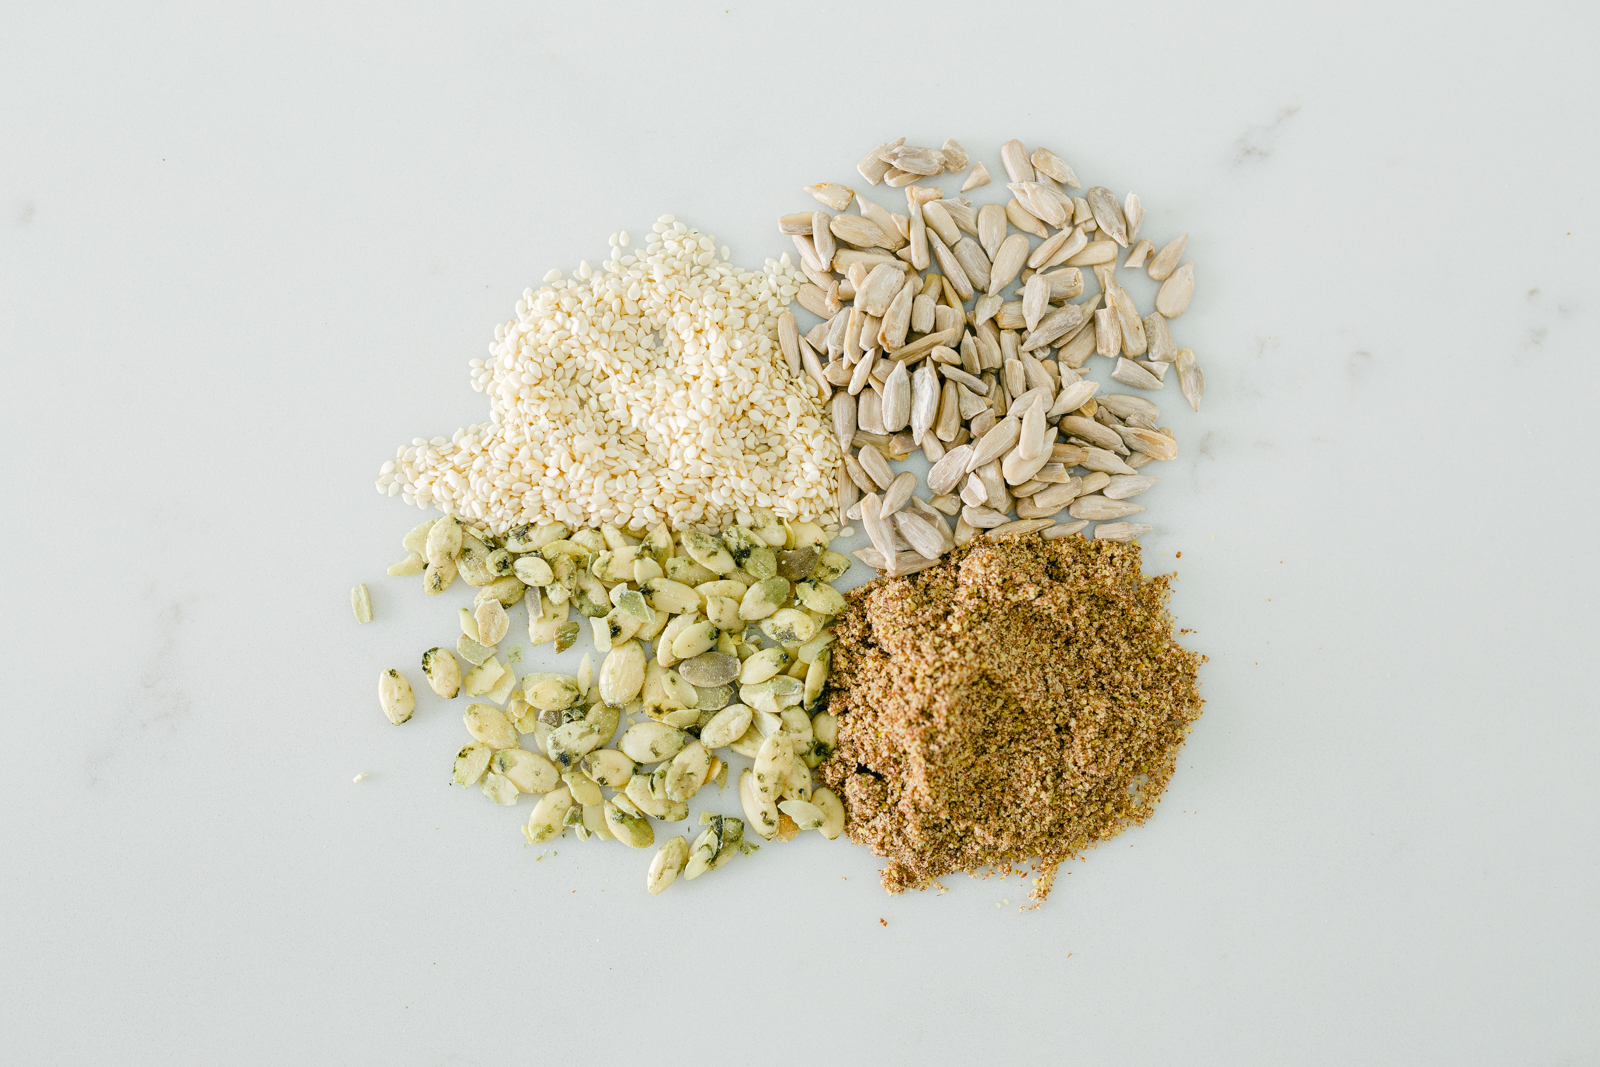 Different types of seeds used for seed cycling